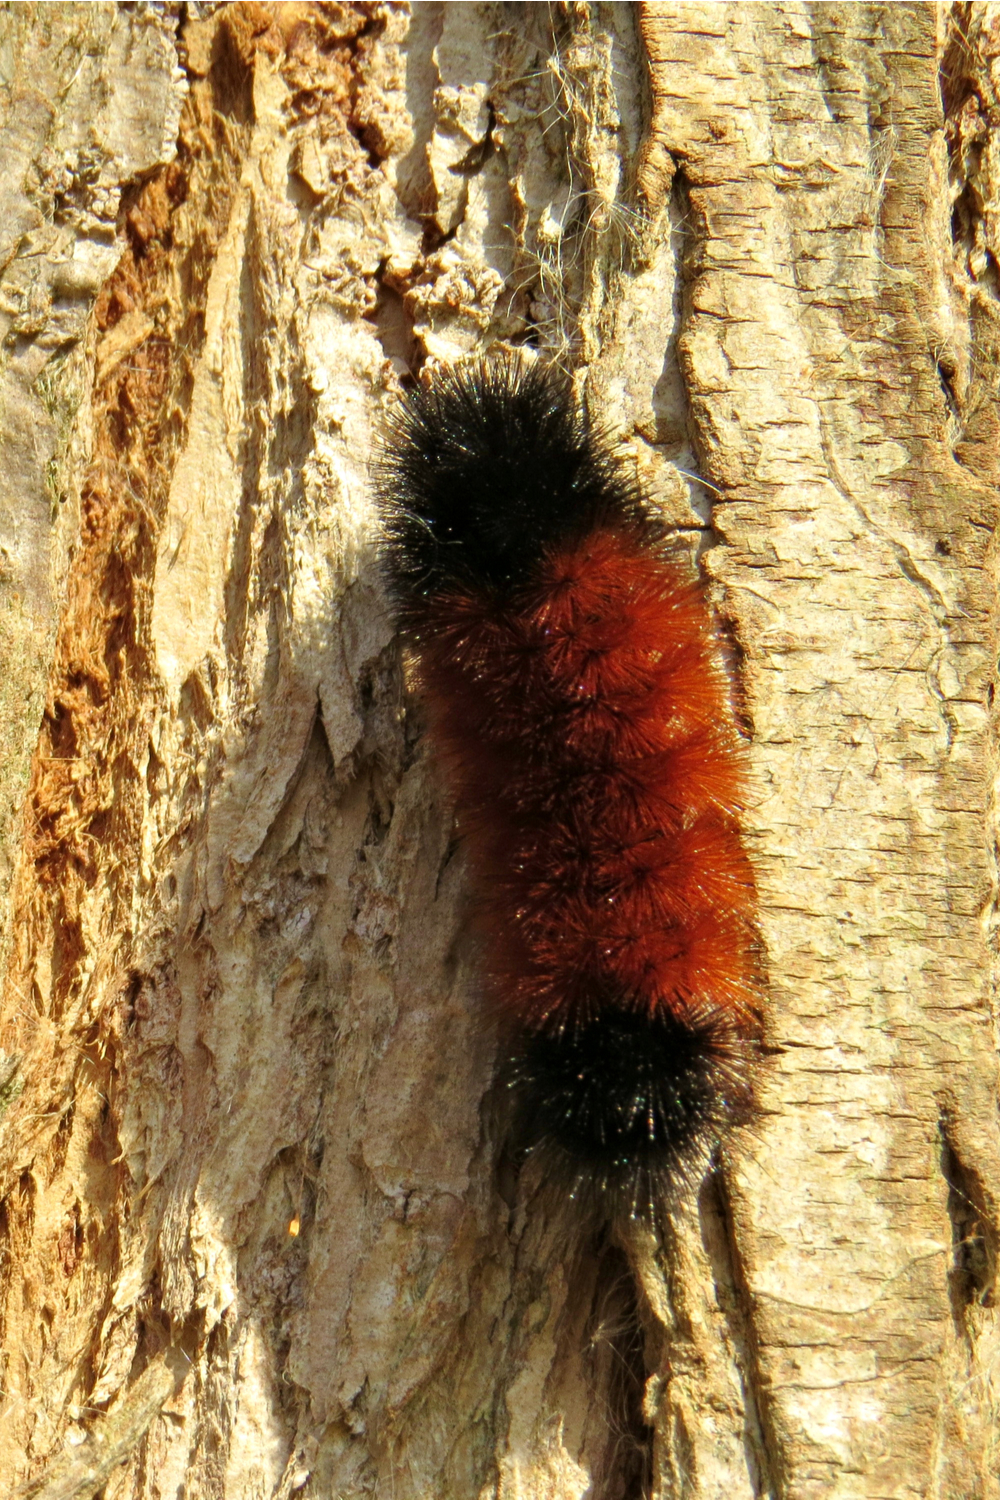 Wooly Worm Habits and Biology